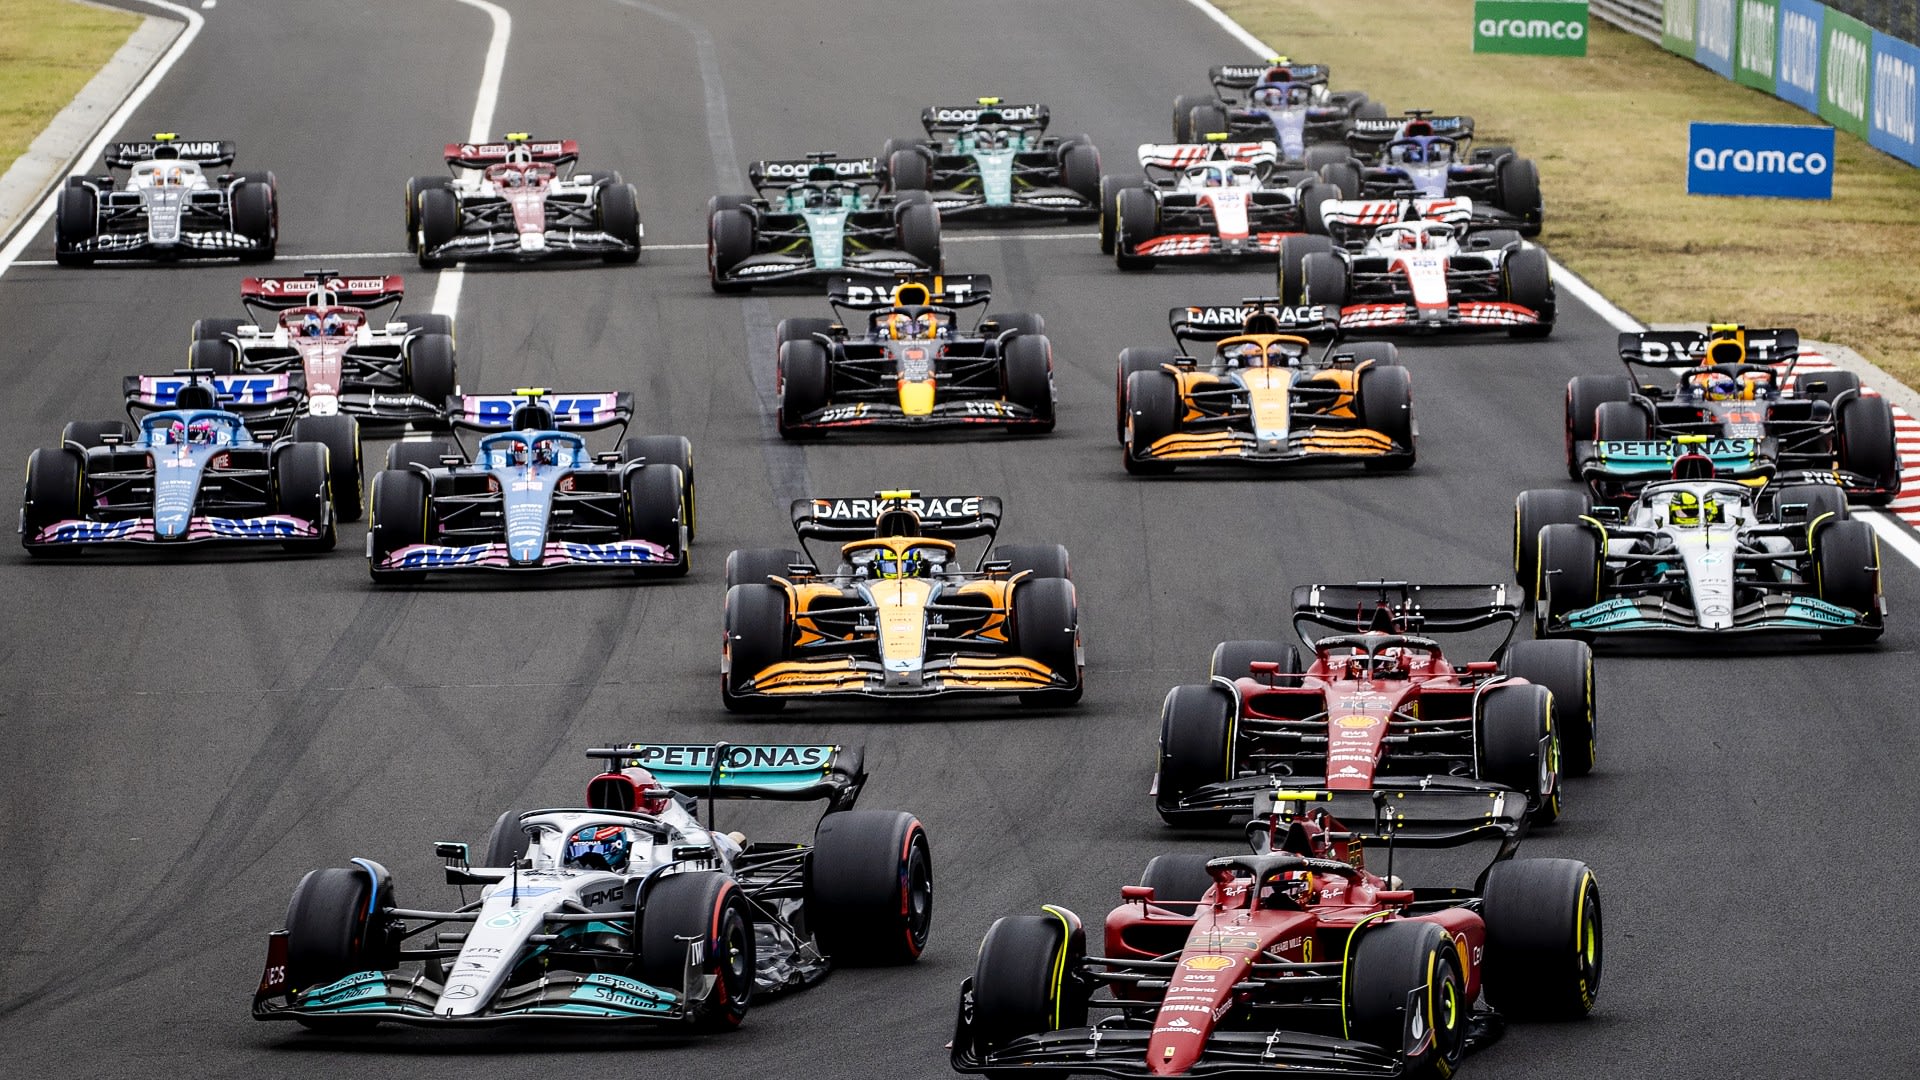 The constructors title, win records, team battles and much more